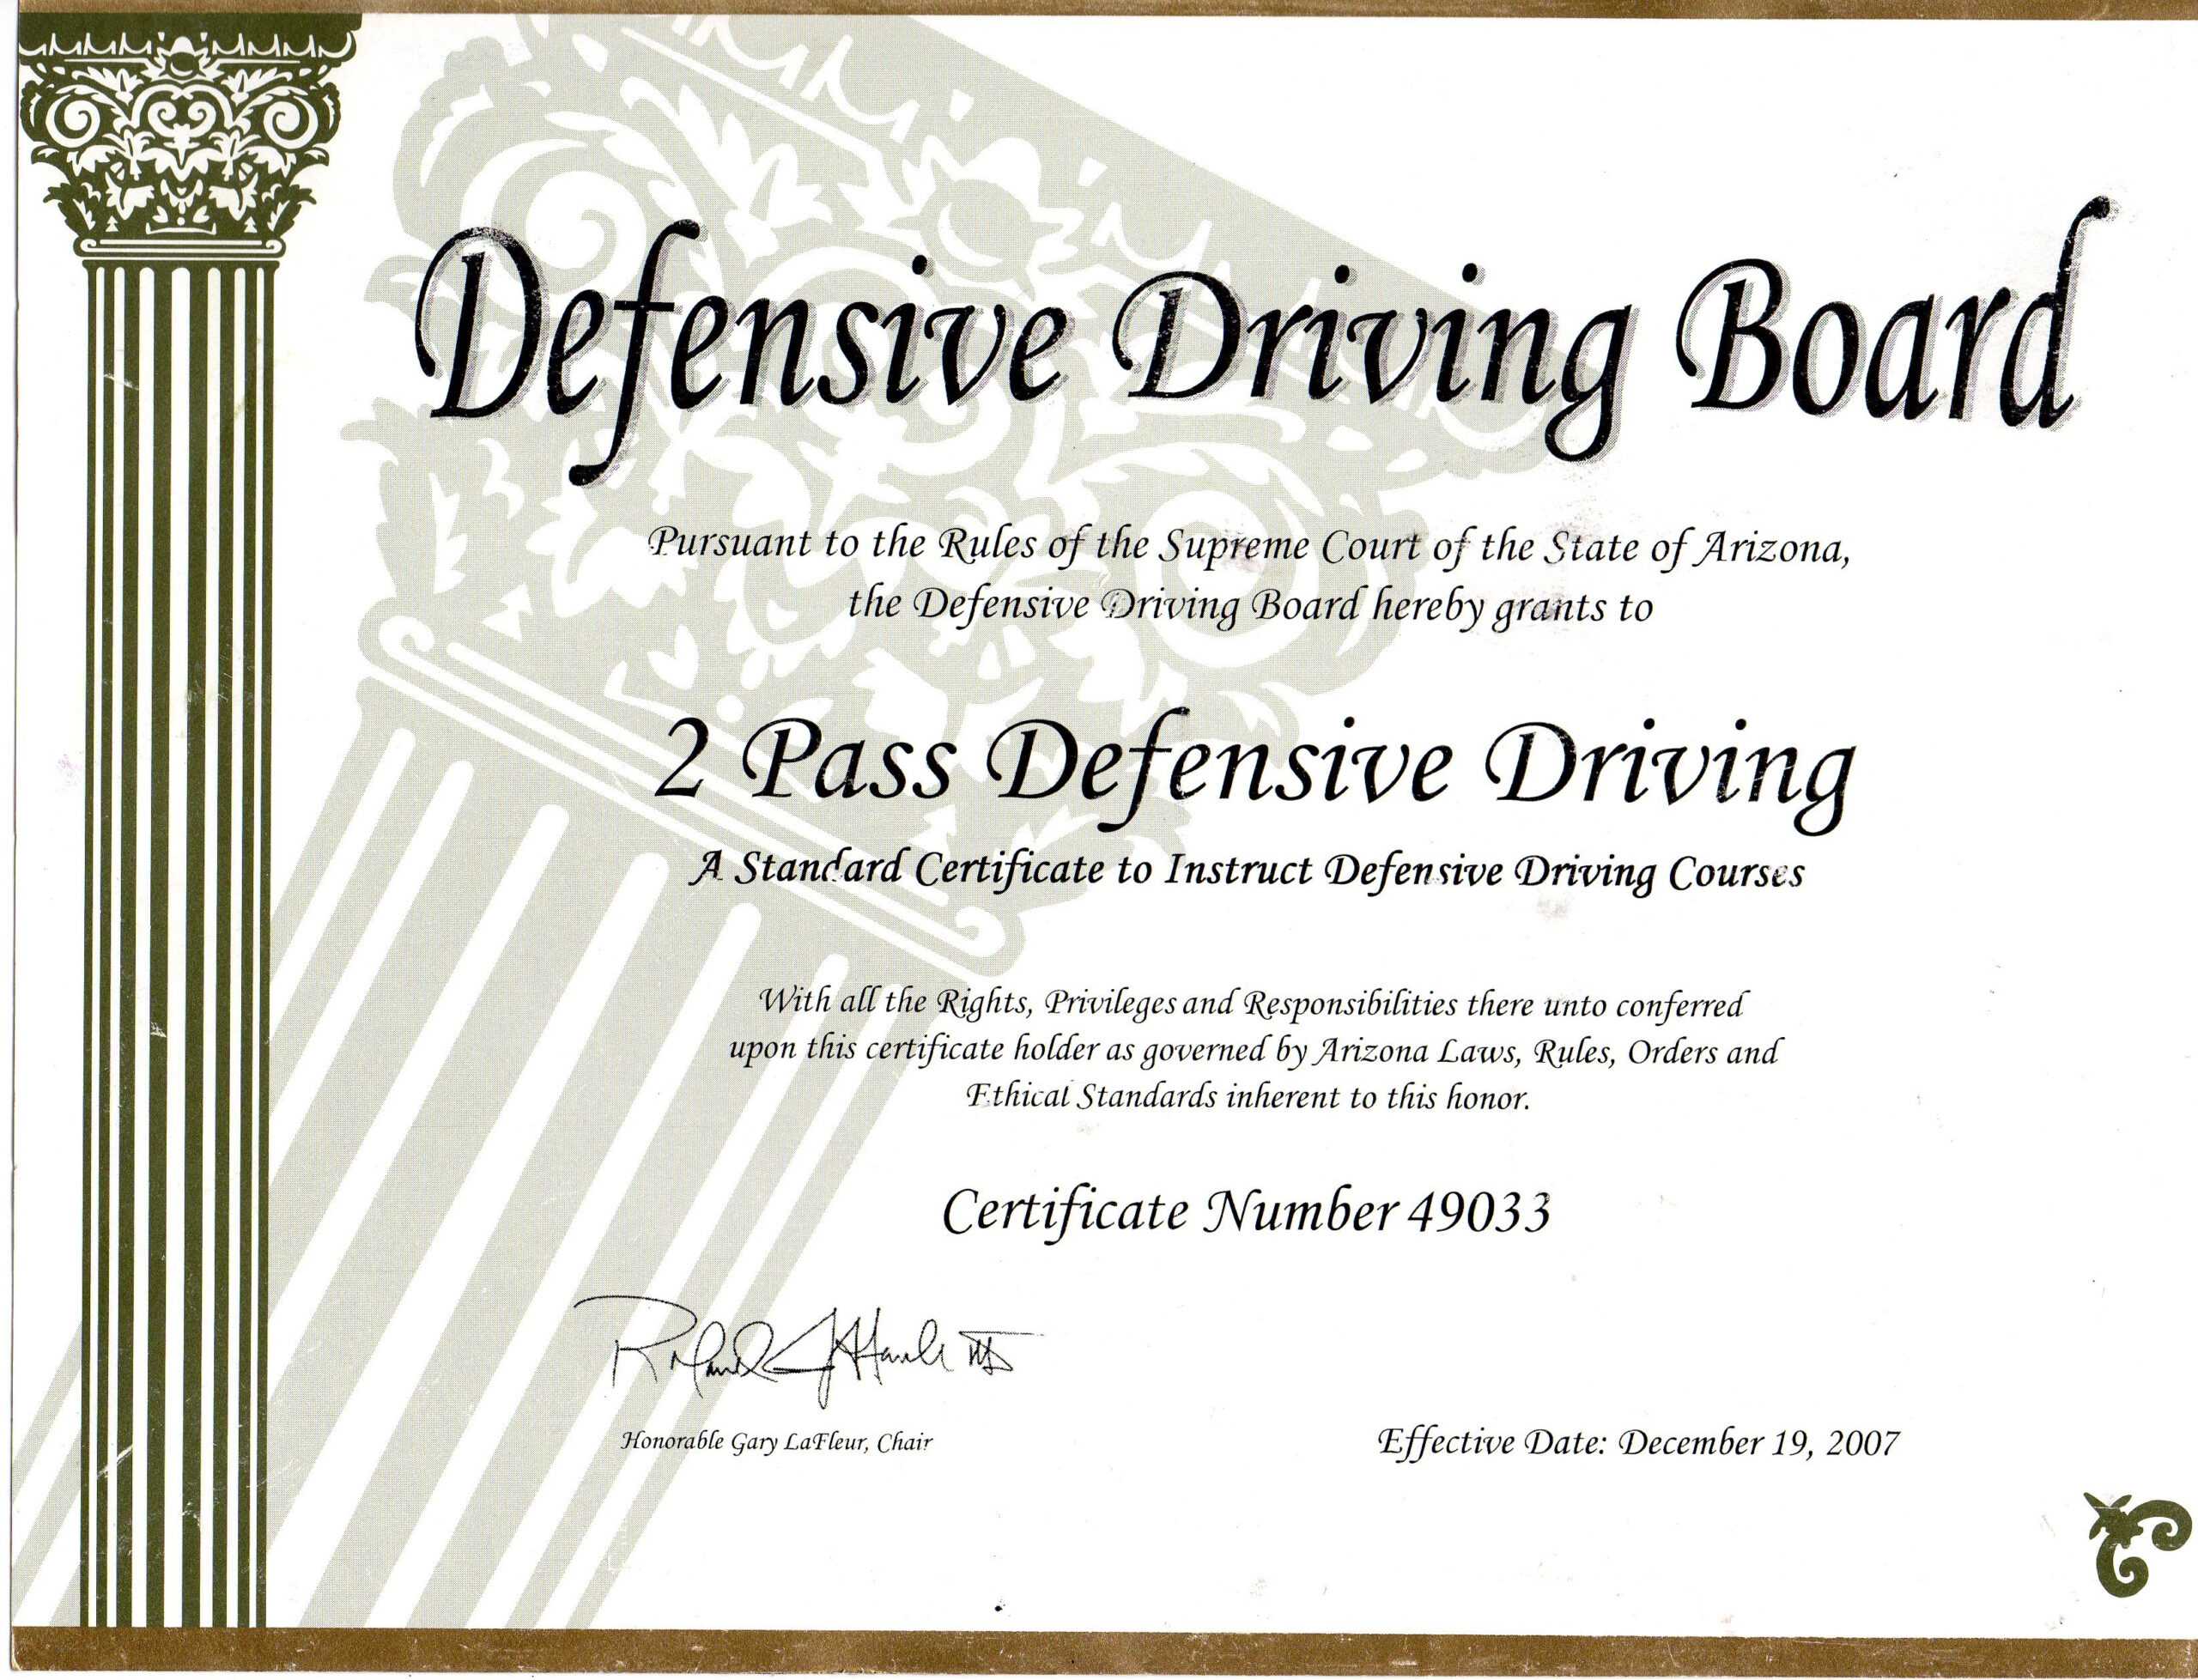 Safe Driving Certificate Template ] - Some Appreciation With Regard To Safe Driving Certificate Template